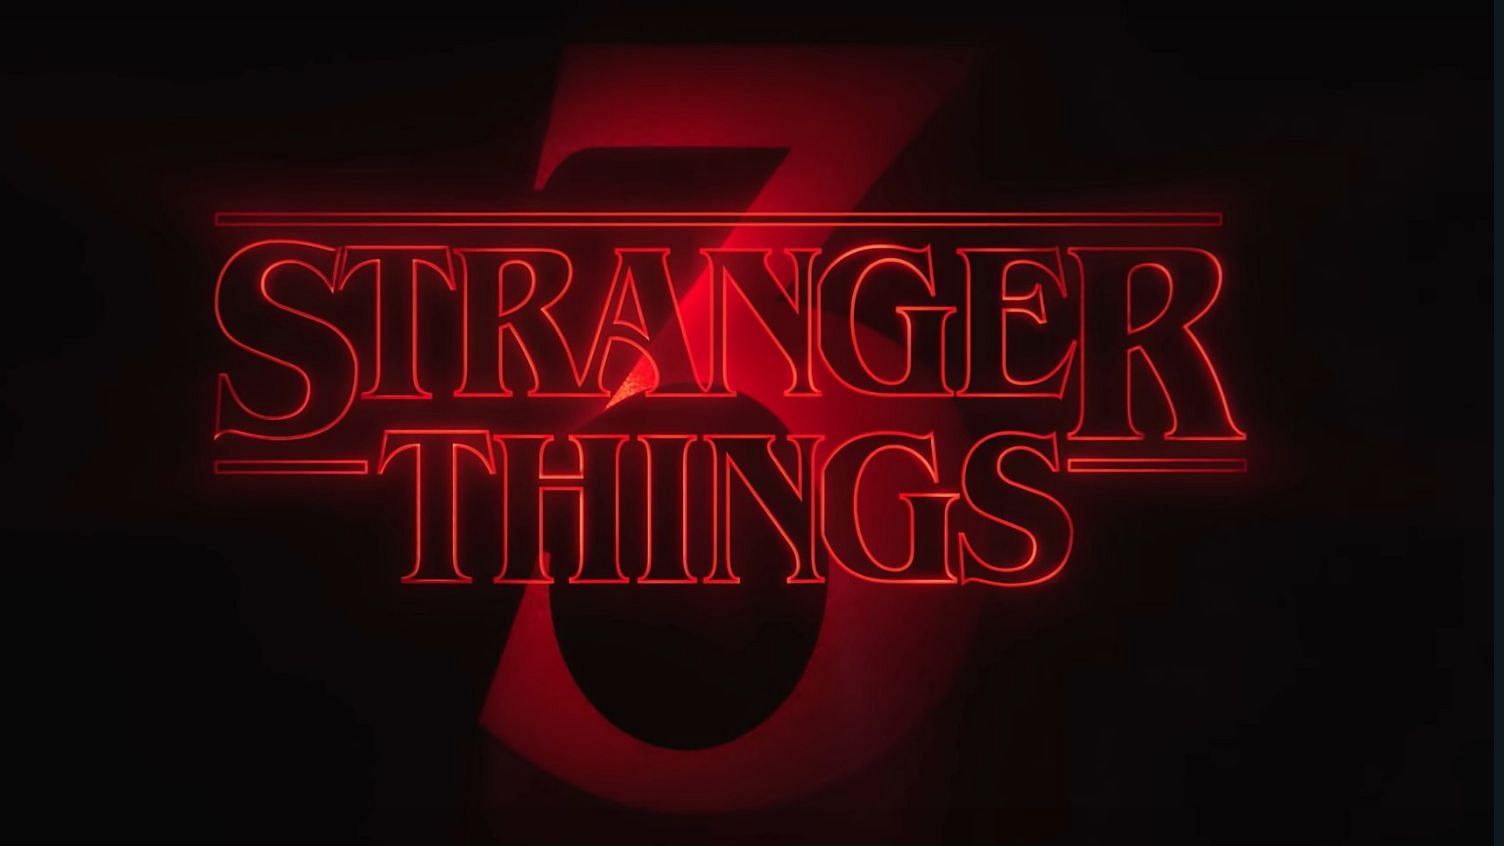 While the third instalment of the Netflix show is set to drop in 2019, the episode titles of season 3 were unveiled in a teaser by the streaming platform.